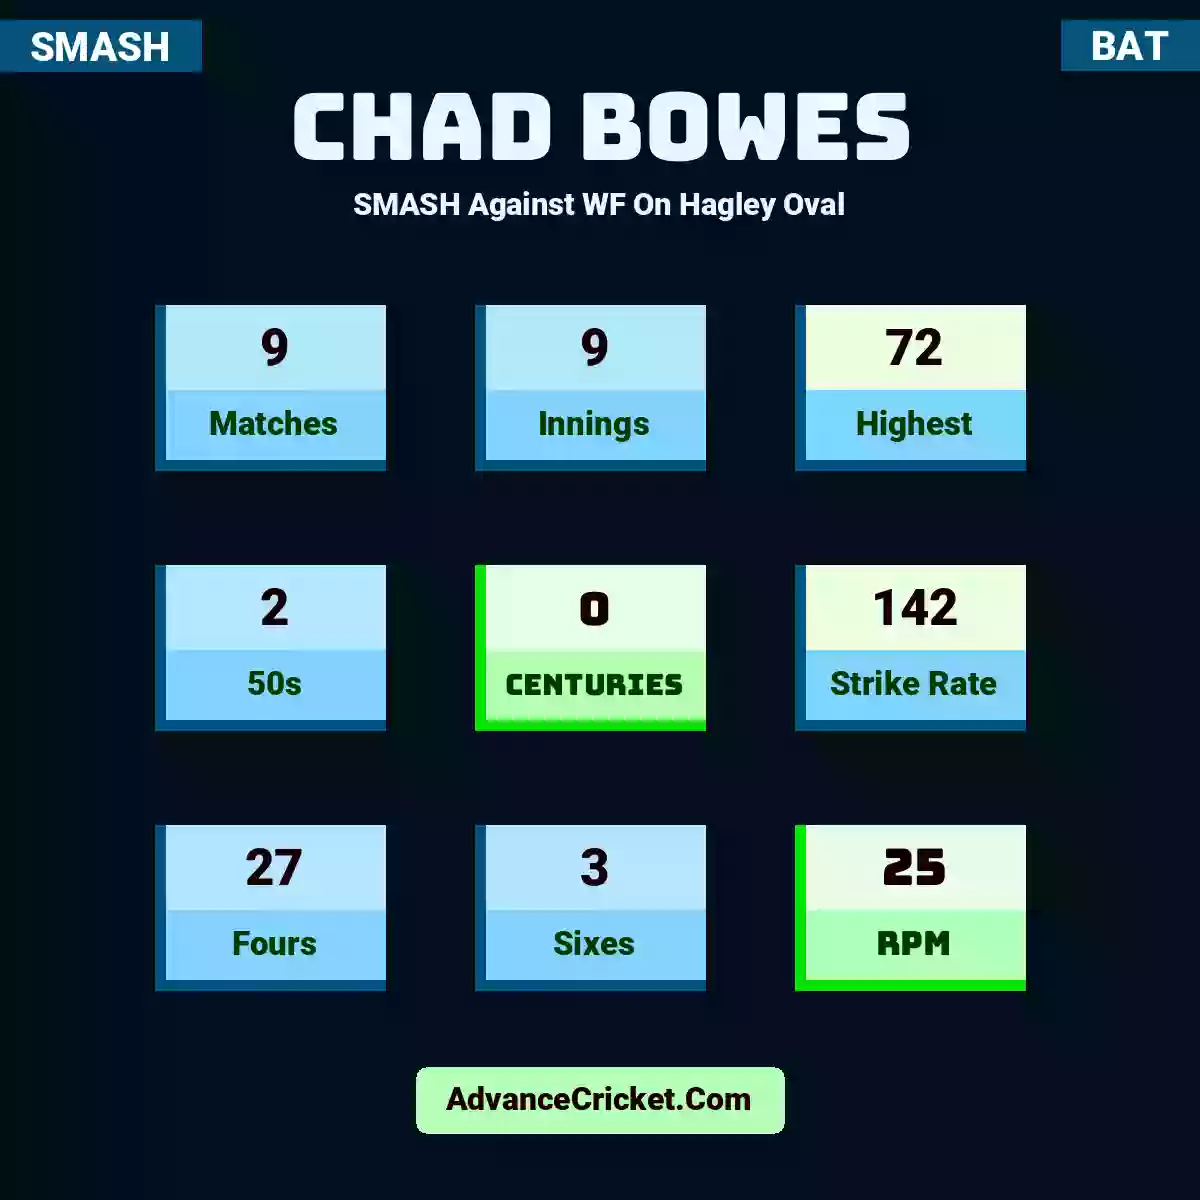 Chad Bowes SMASH  Against WF On Hagley Oval, Chad Bowes played 9 matches, scored 72 runs as highest, 2 half-centuries, and 0 centuries, with a strike rate of 142. C.Bowes hit 27 fours and 3 sixes, with an RPM of 25.